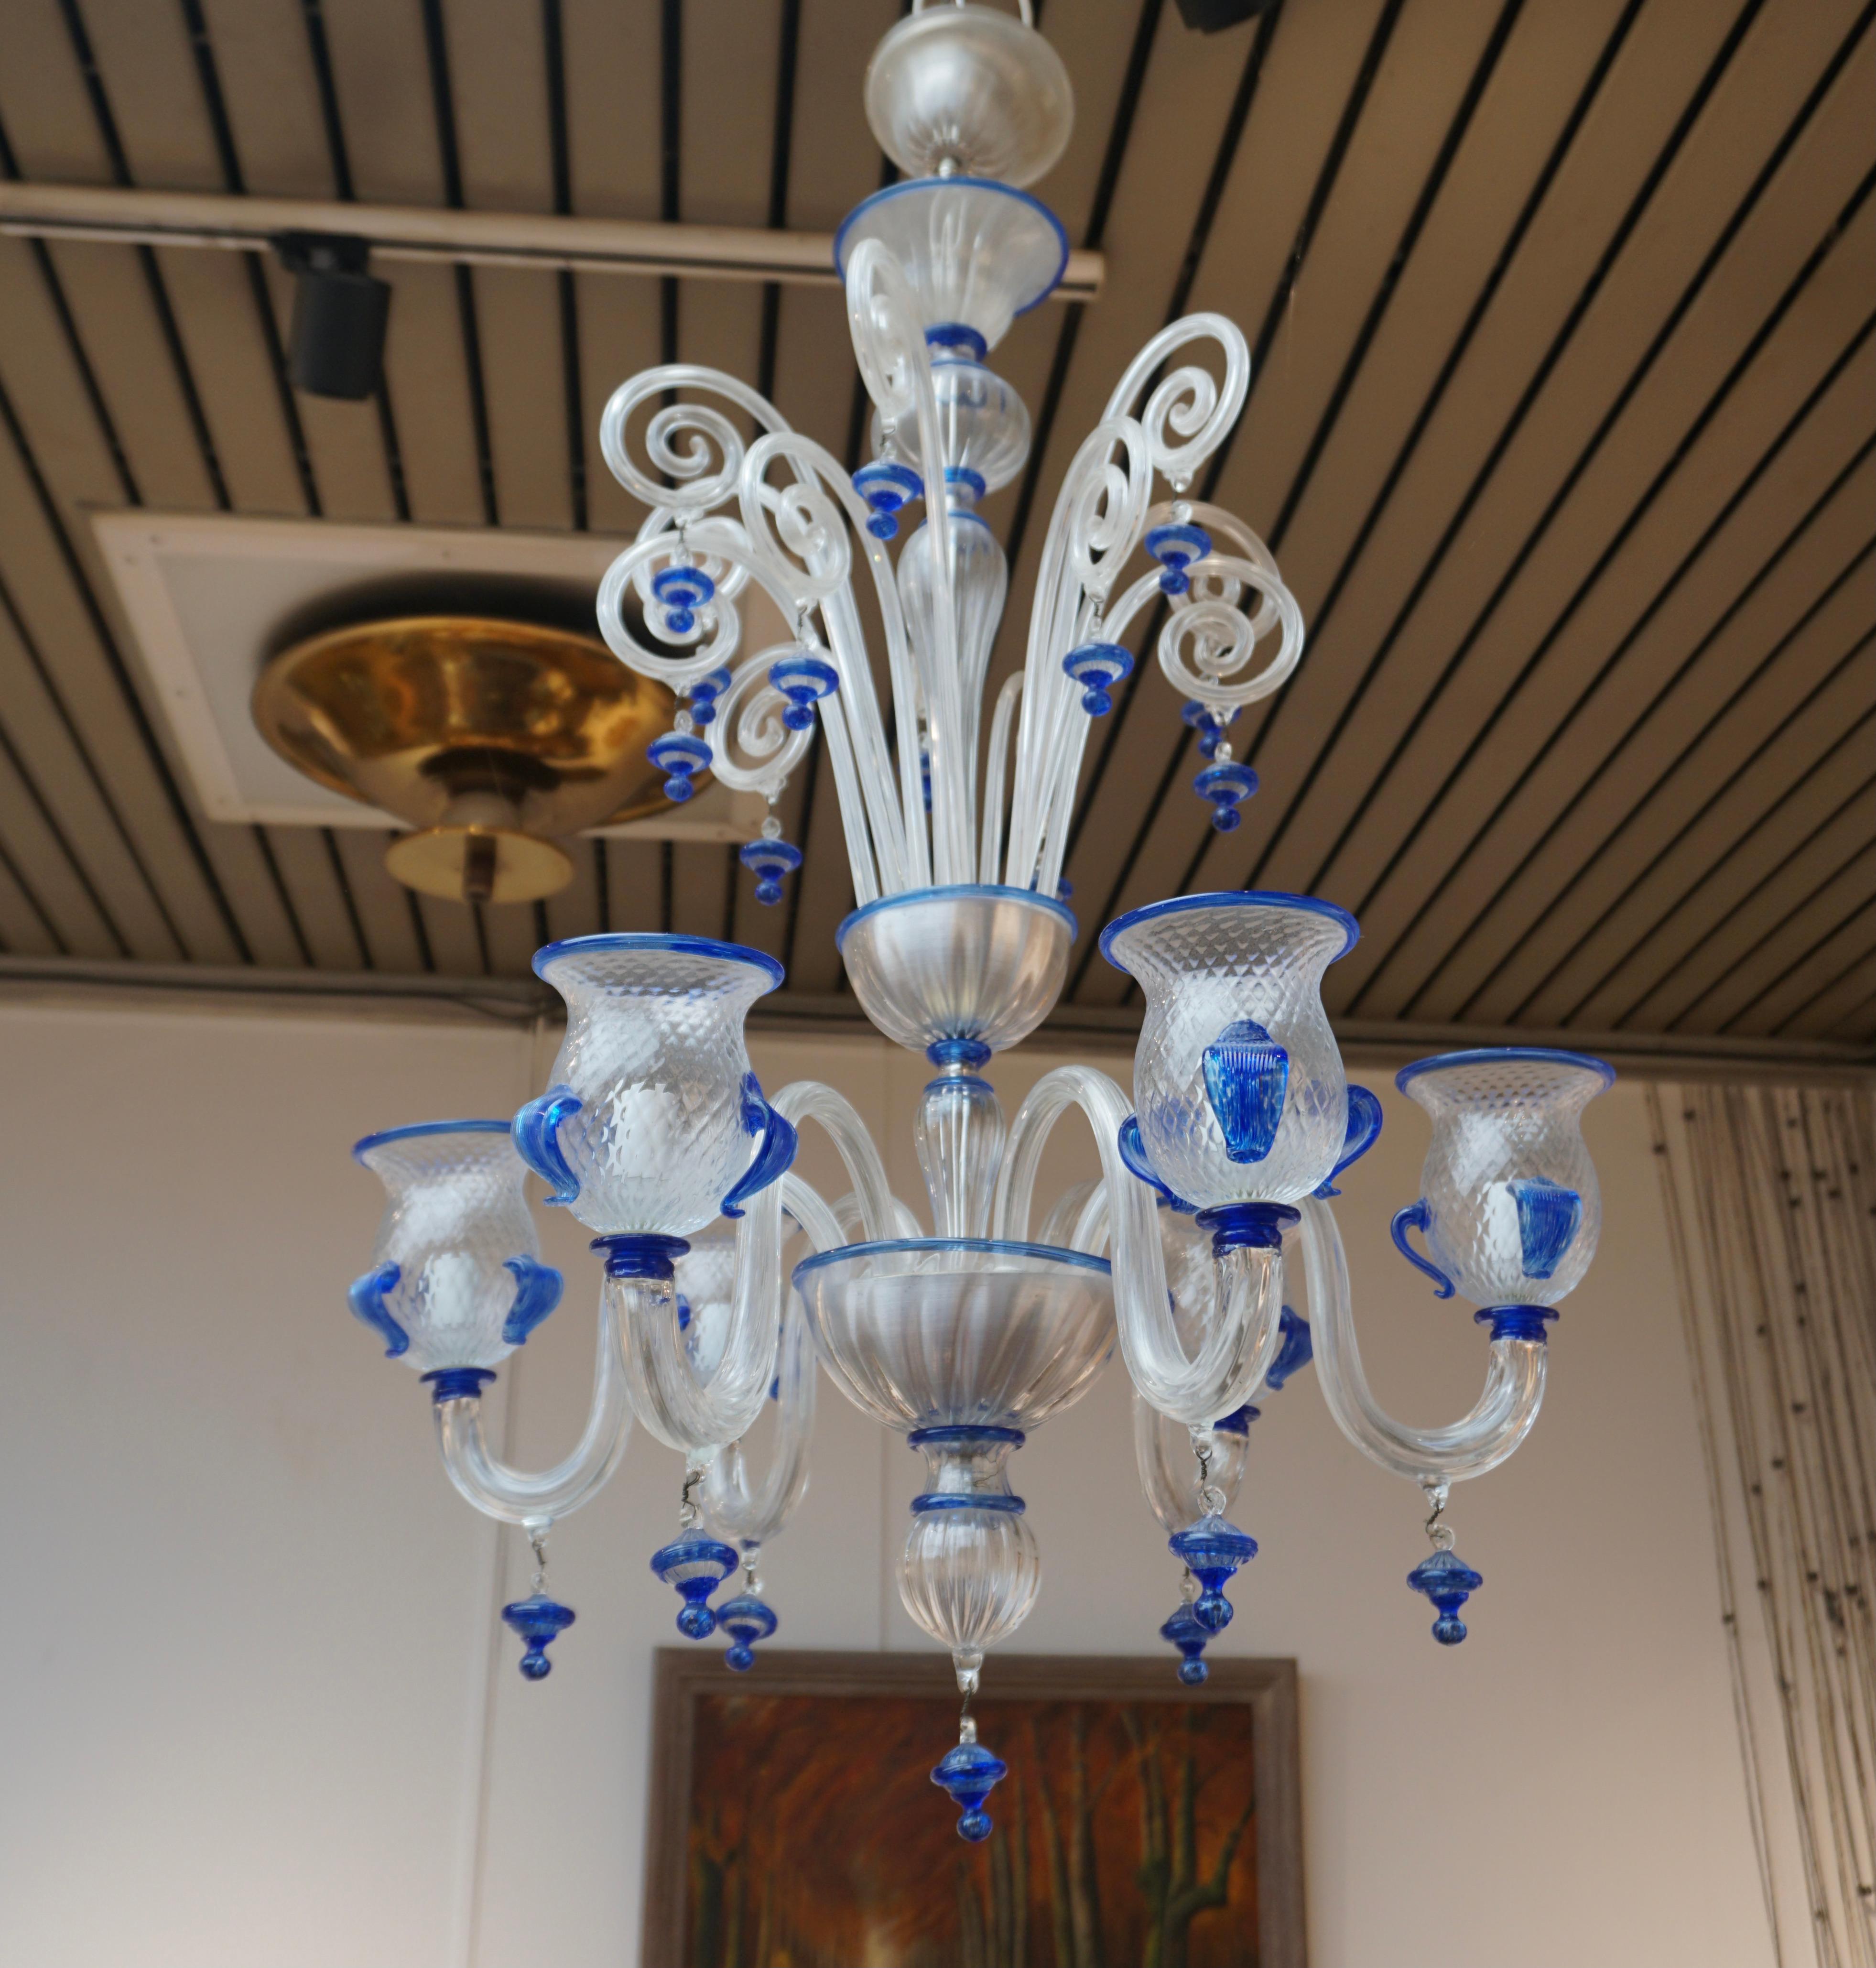 Italian Venetian Murano (1970s) blue and transparent glass chandelier with 6 arms.

The light requires six single E14 screw fit lightbulbs (60Watt max.) LED compatible.

Measures: Diameter 27.5 inch - 70 cm.
Height fixture 37.4 inch - 95